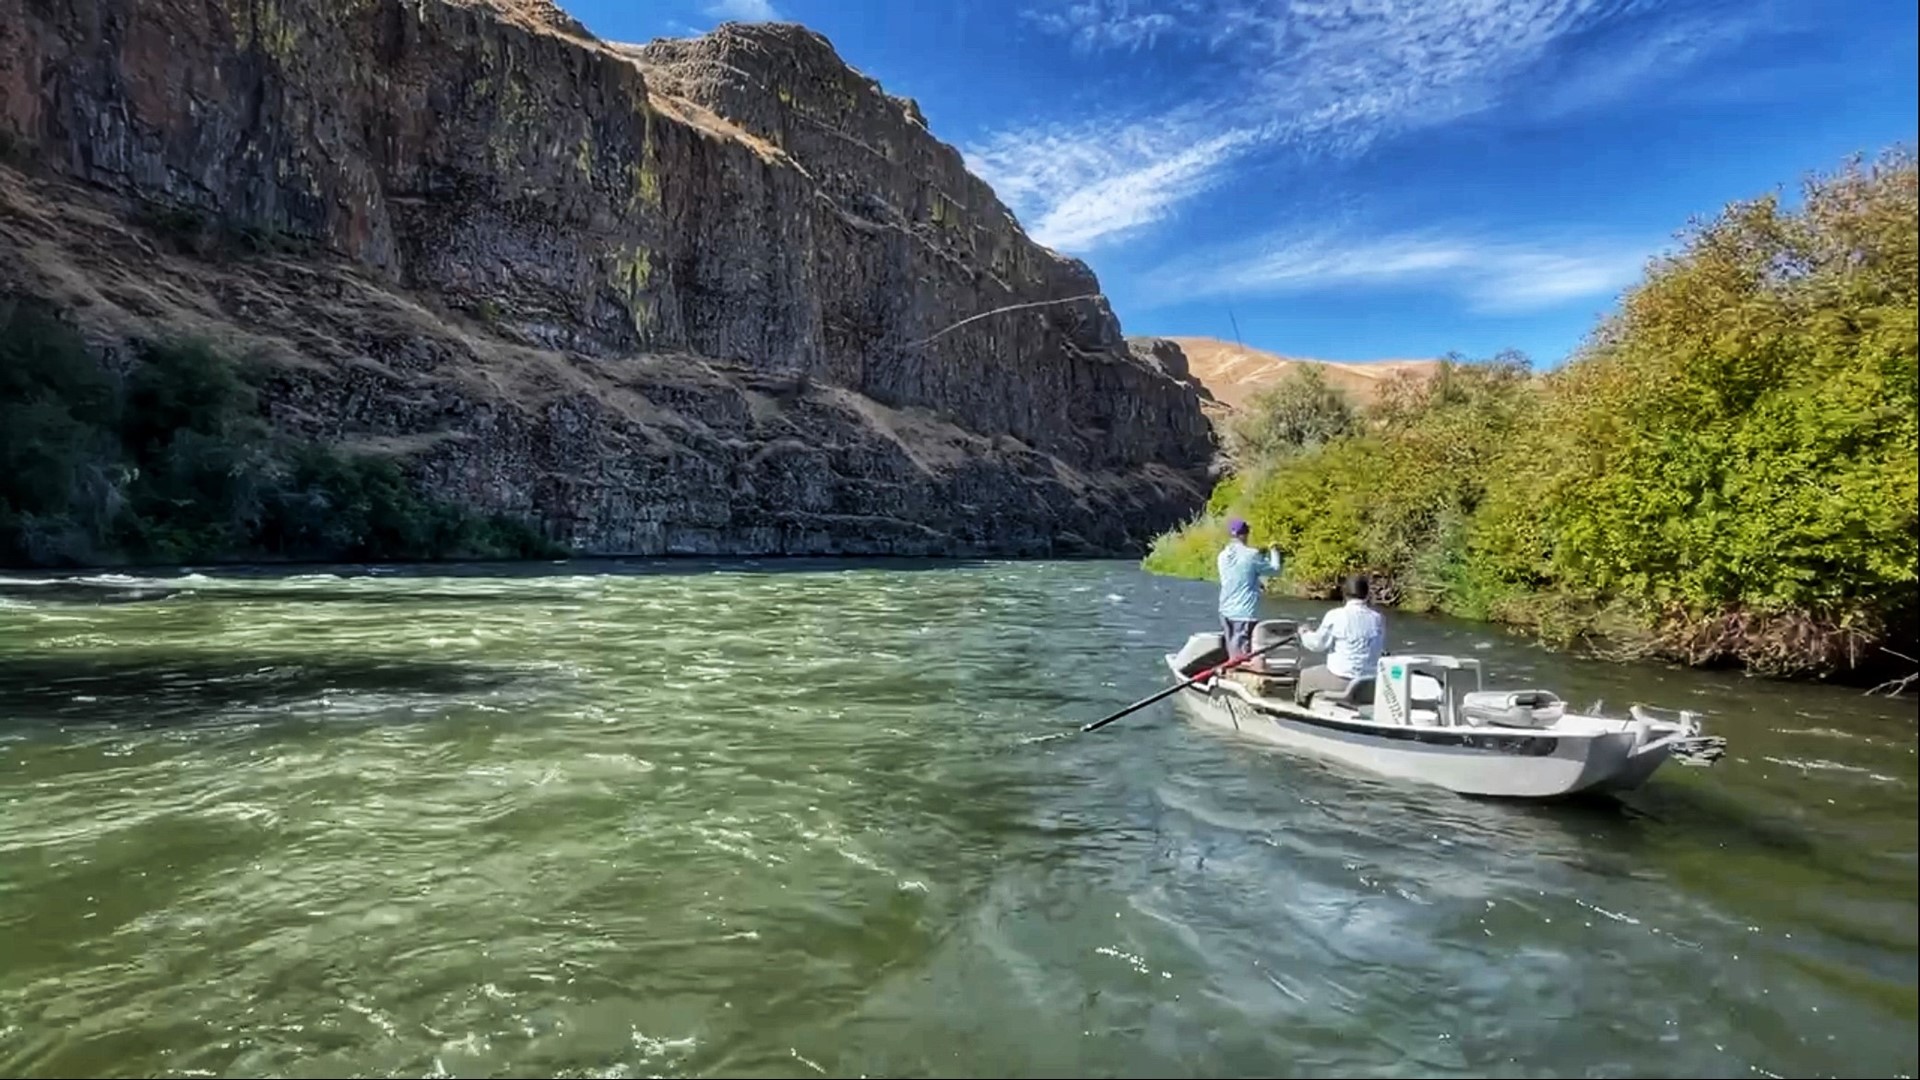 The Yakima is Washington's only blue ribbon fly-fishing river. Sponsored by Yakima Valley Tourism